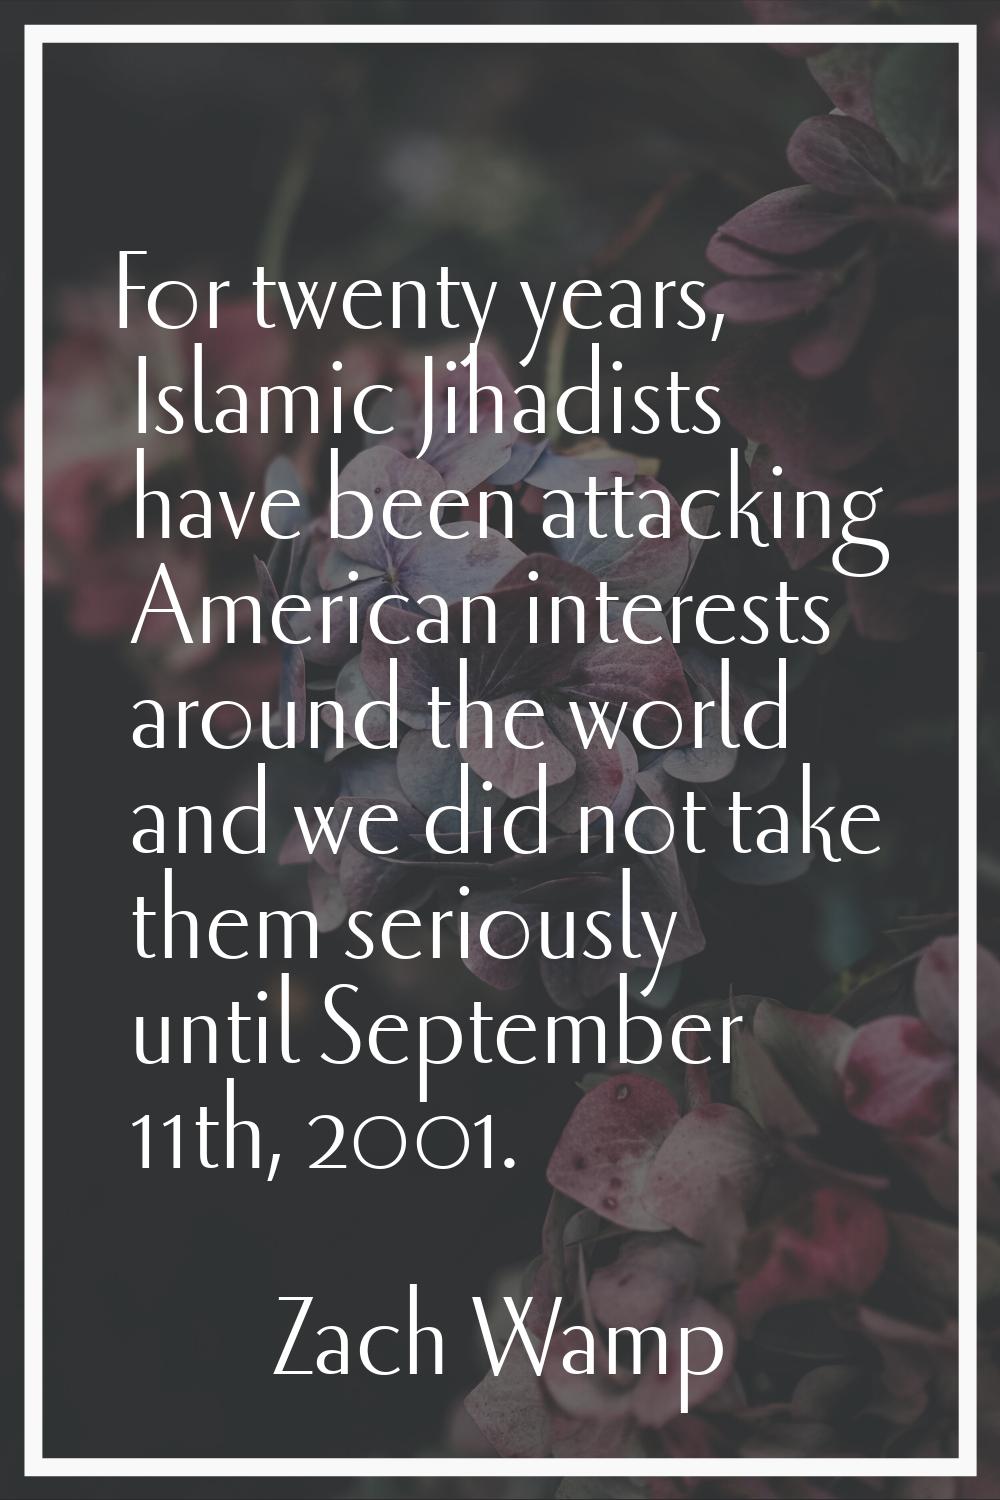 For twenty years, Islamic Jihadists have been attacking American interests around the world and we 